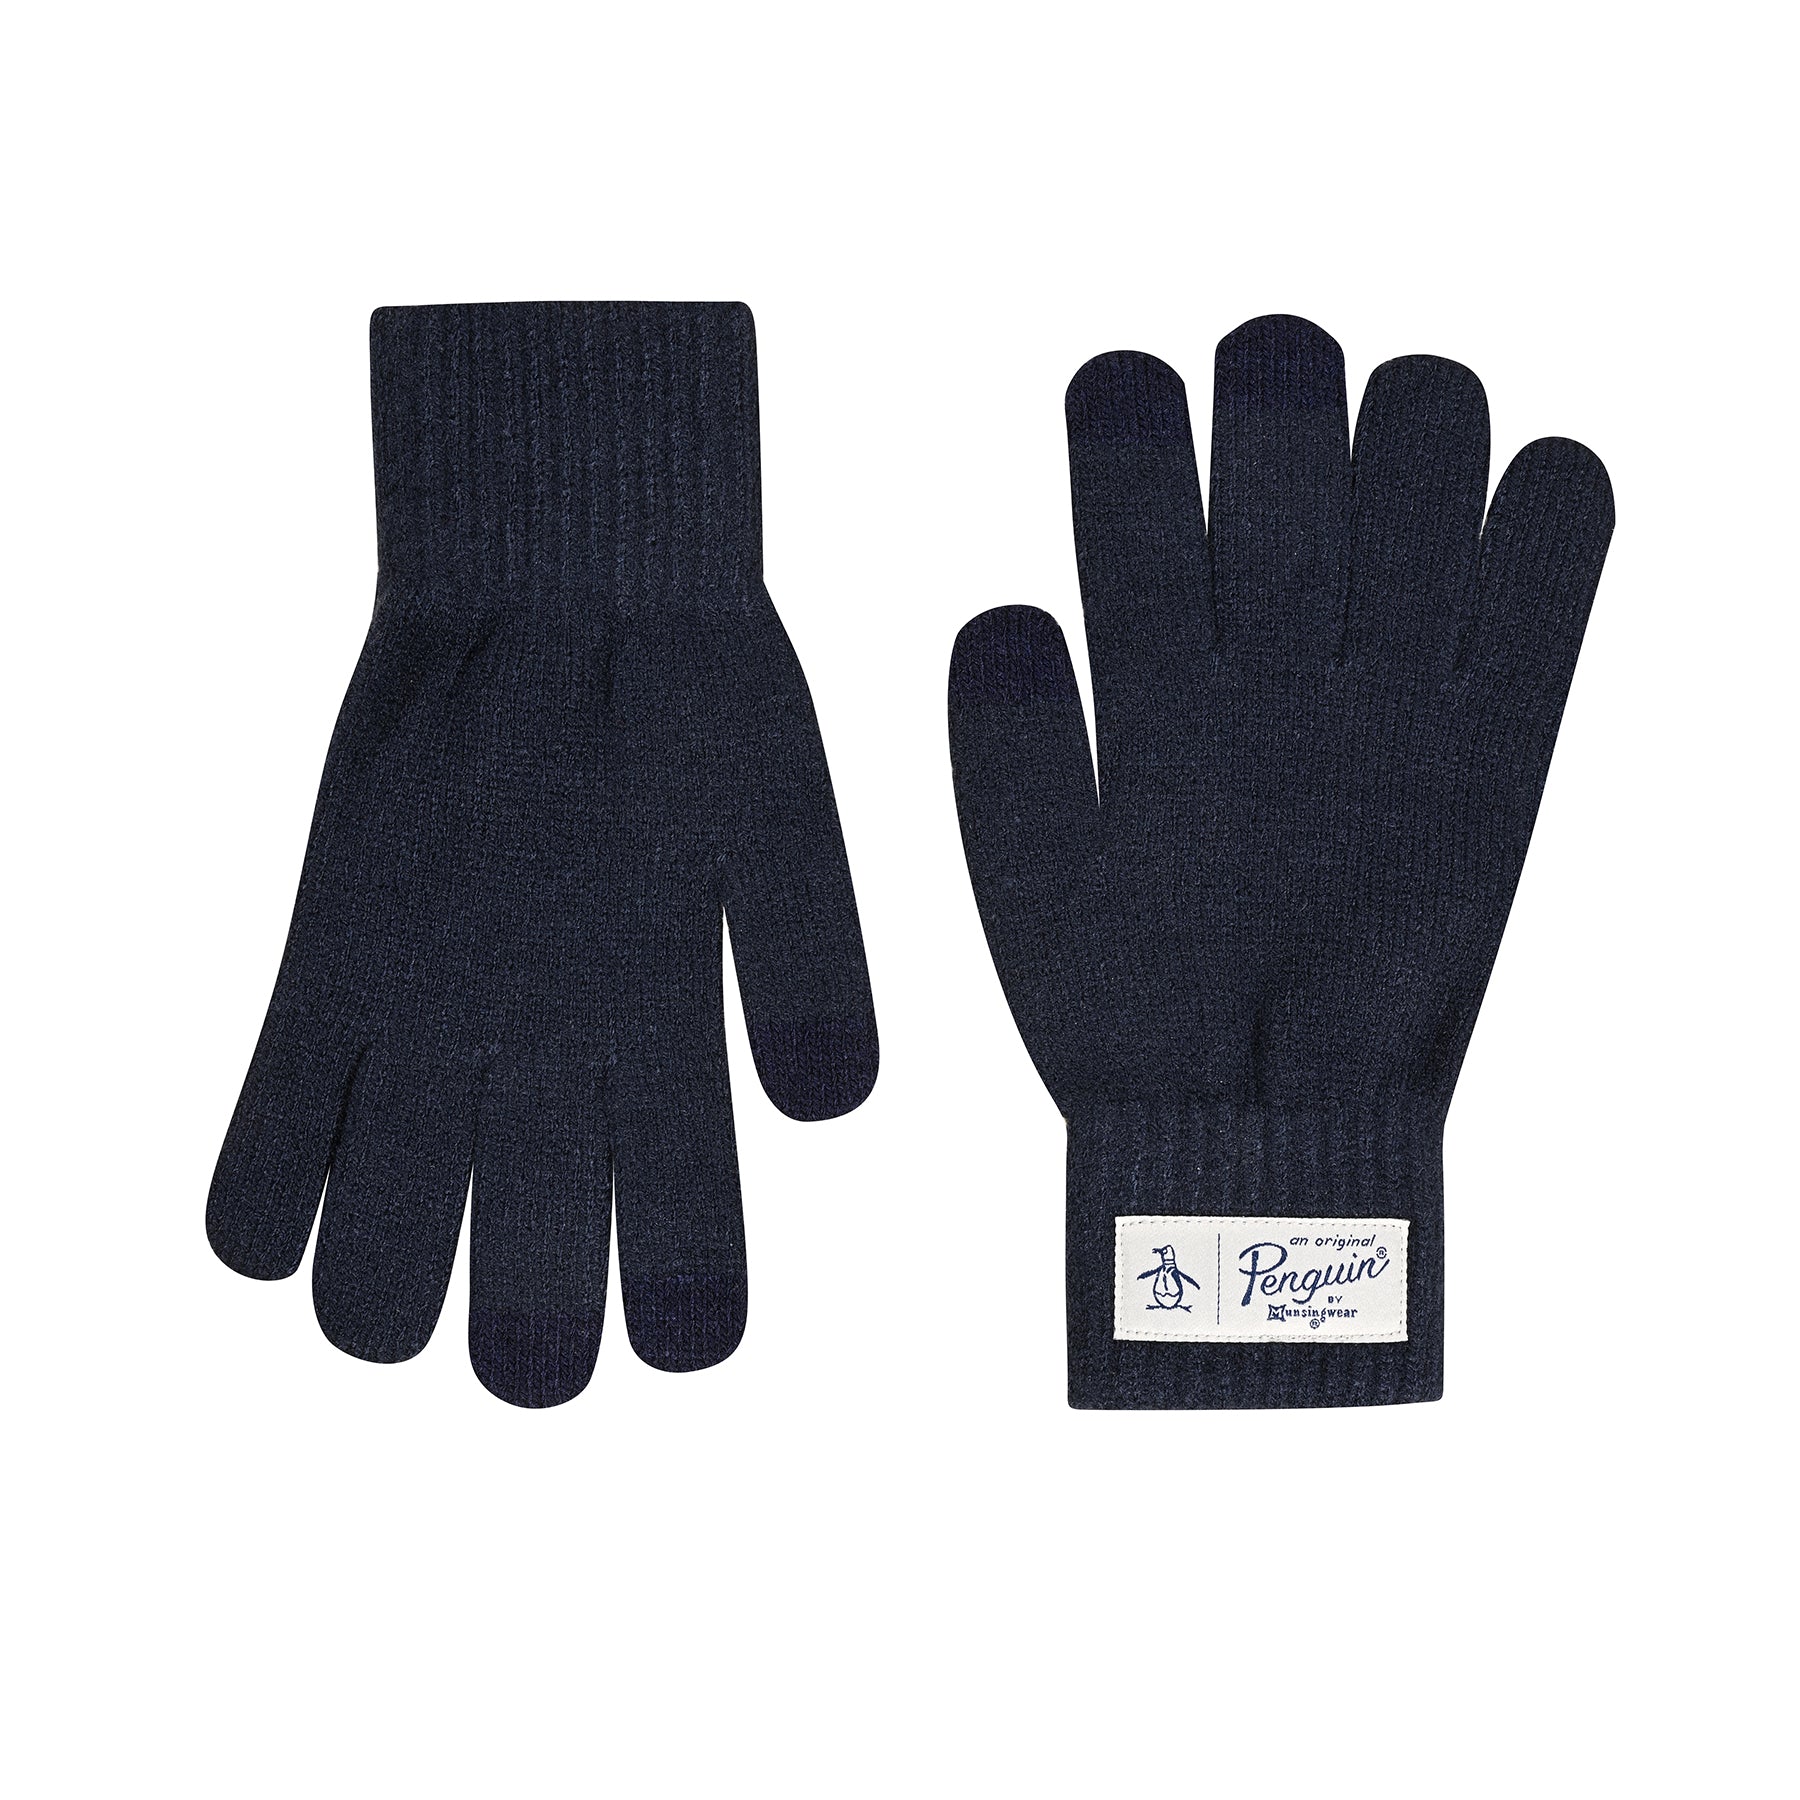 View Nathan Classic Knit Glove In Black In True Blue information